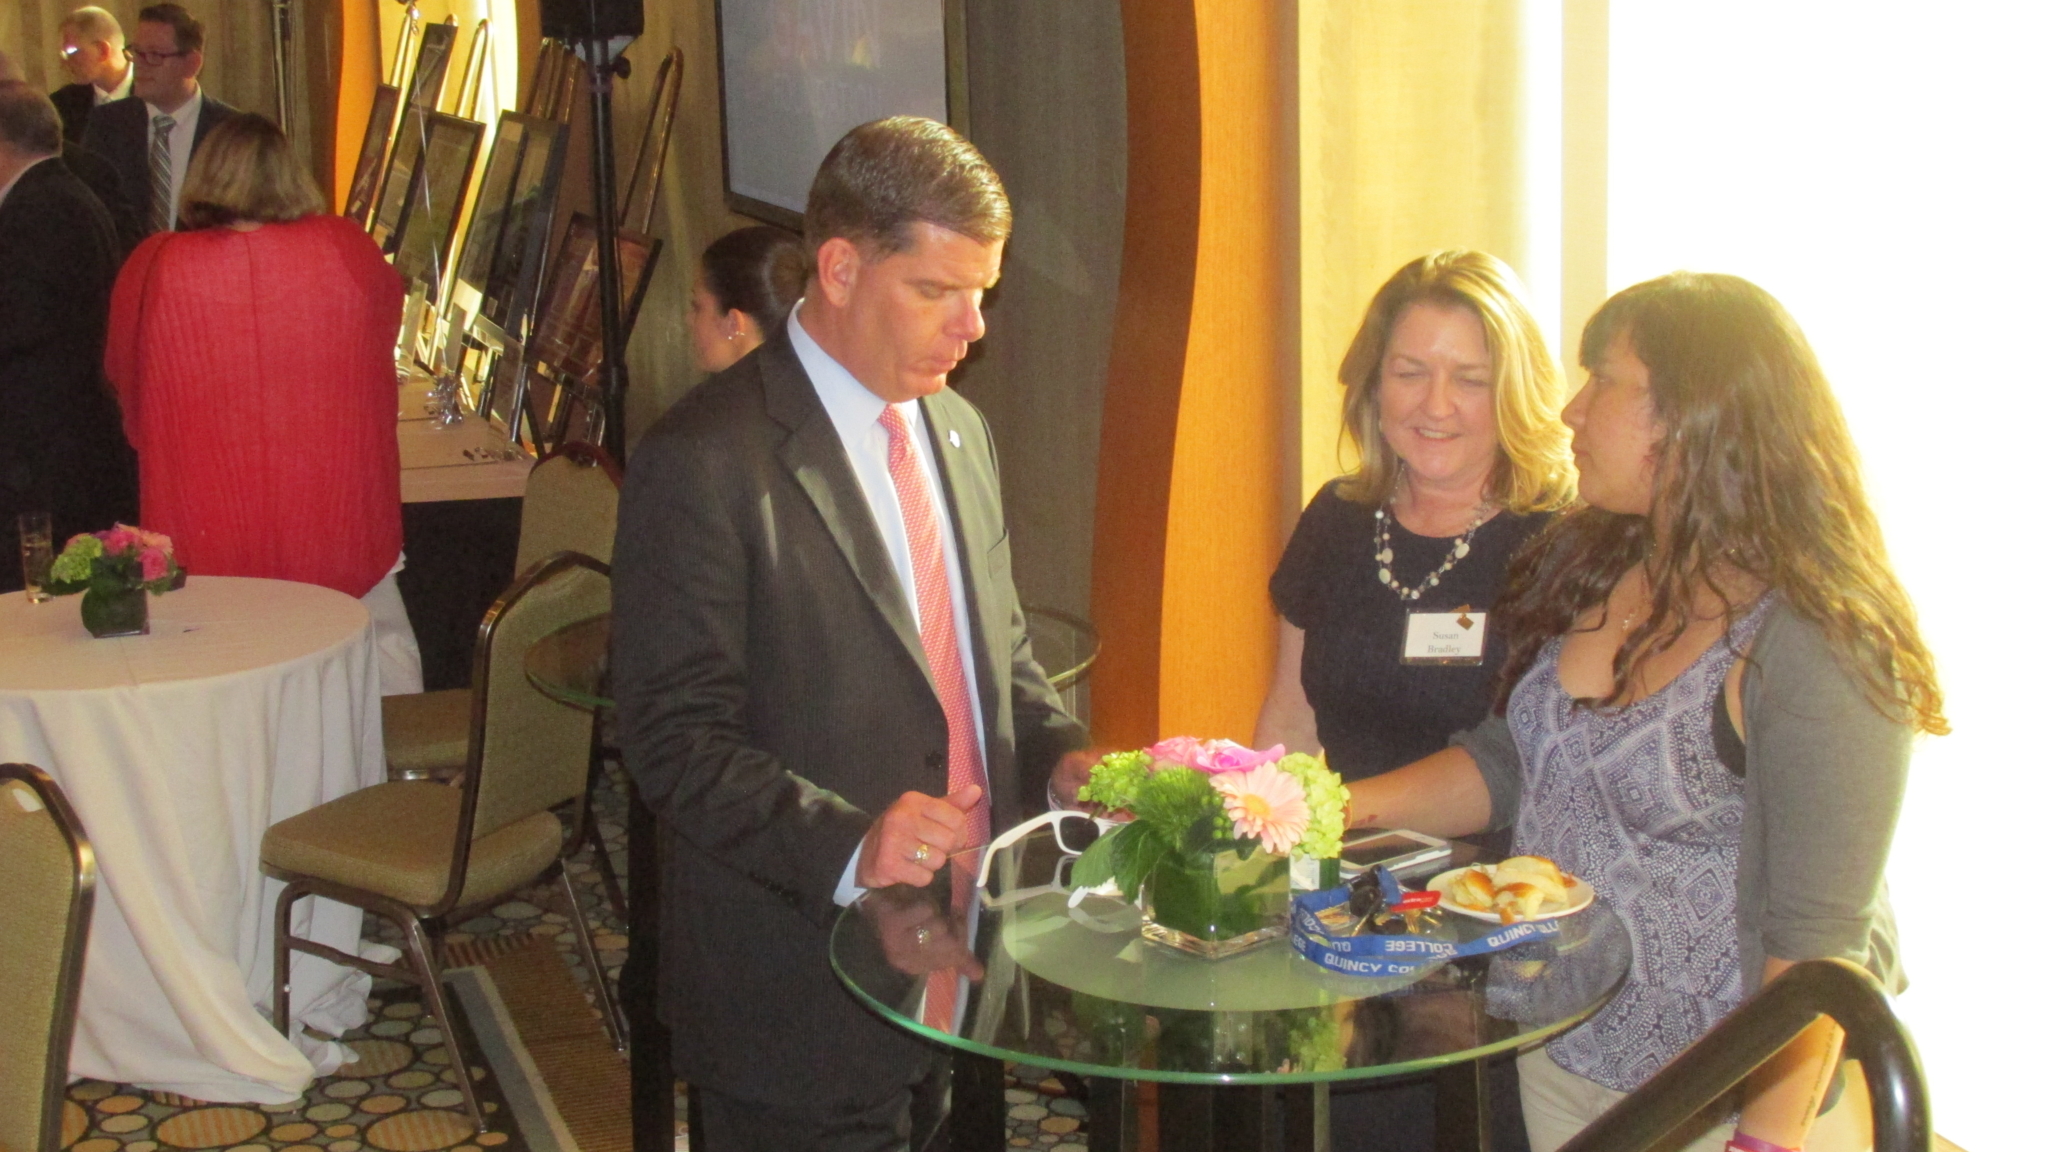 Mayor Marty Walsh spends a few quiet moments with guests at the Gavin Foundation’s “Open Hearts/Open Homes” fundraiser